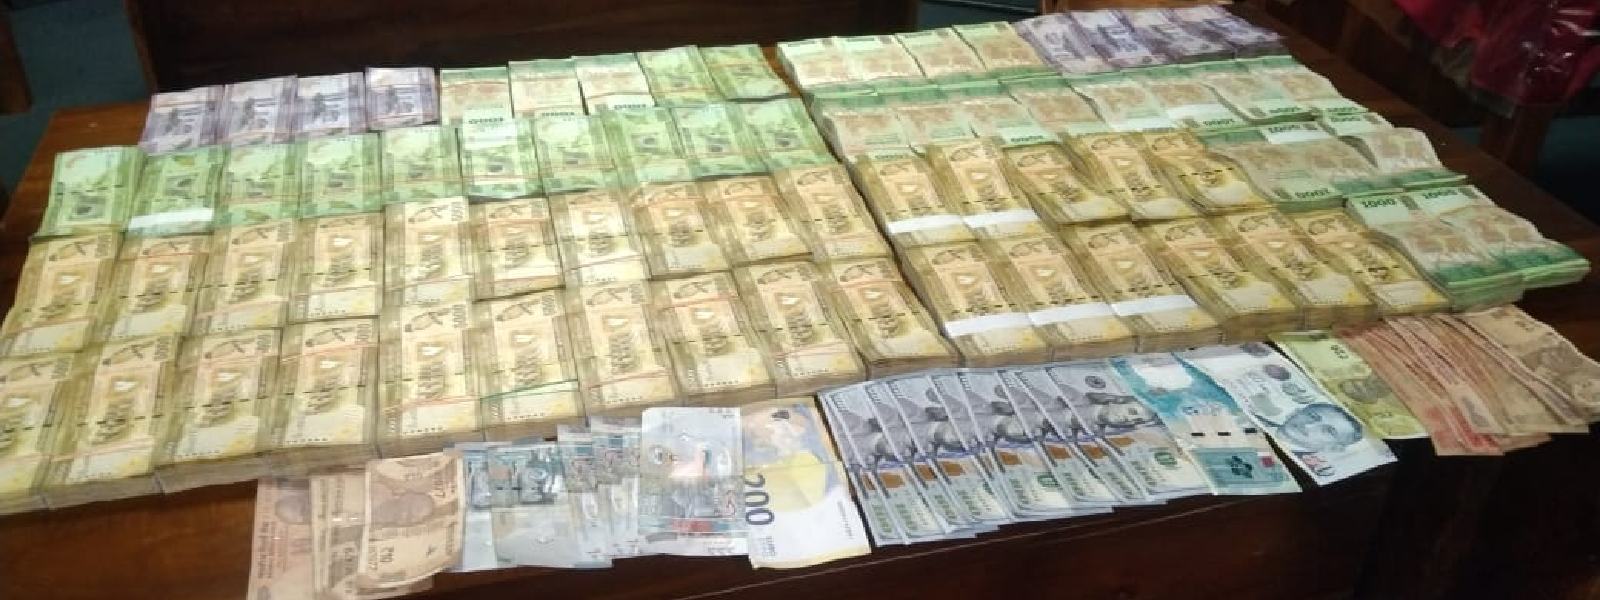 STF arrests four men for money laundering